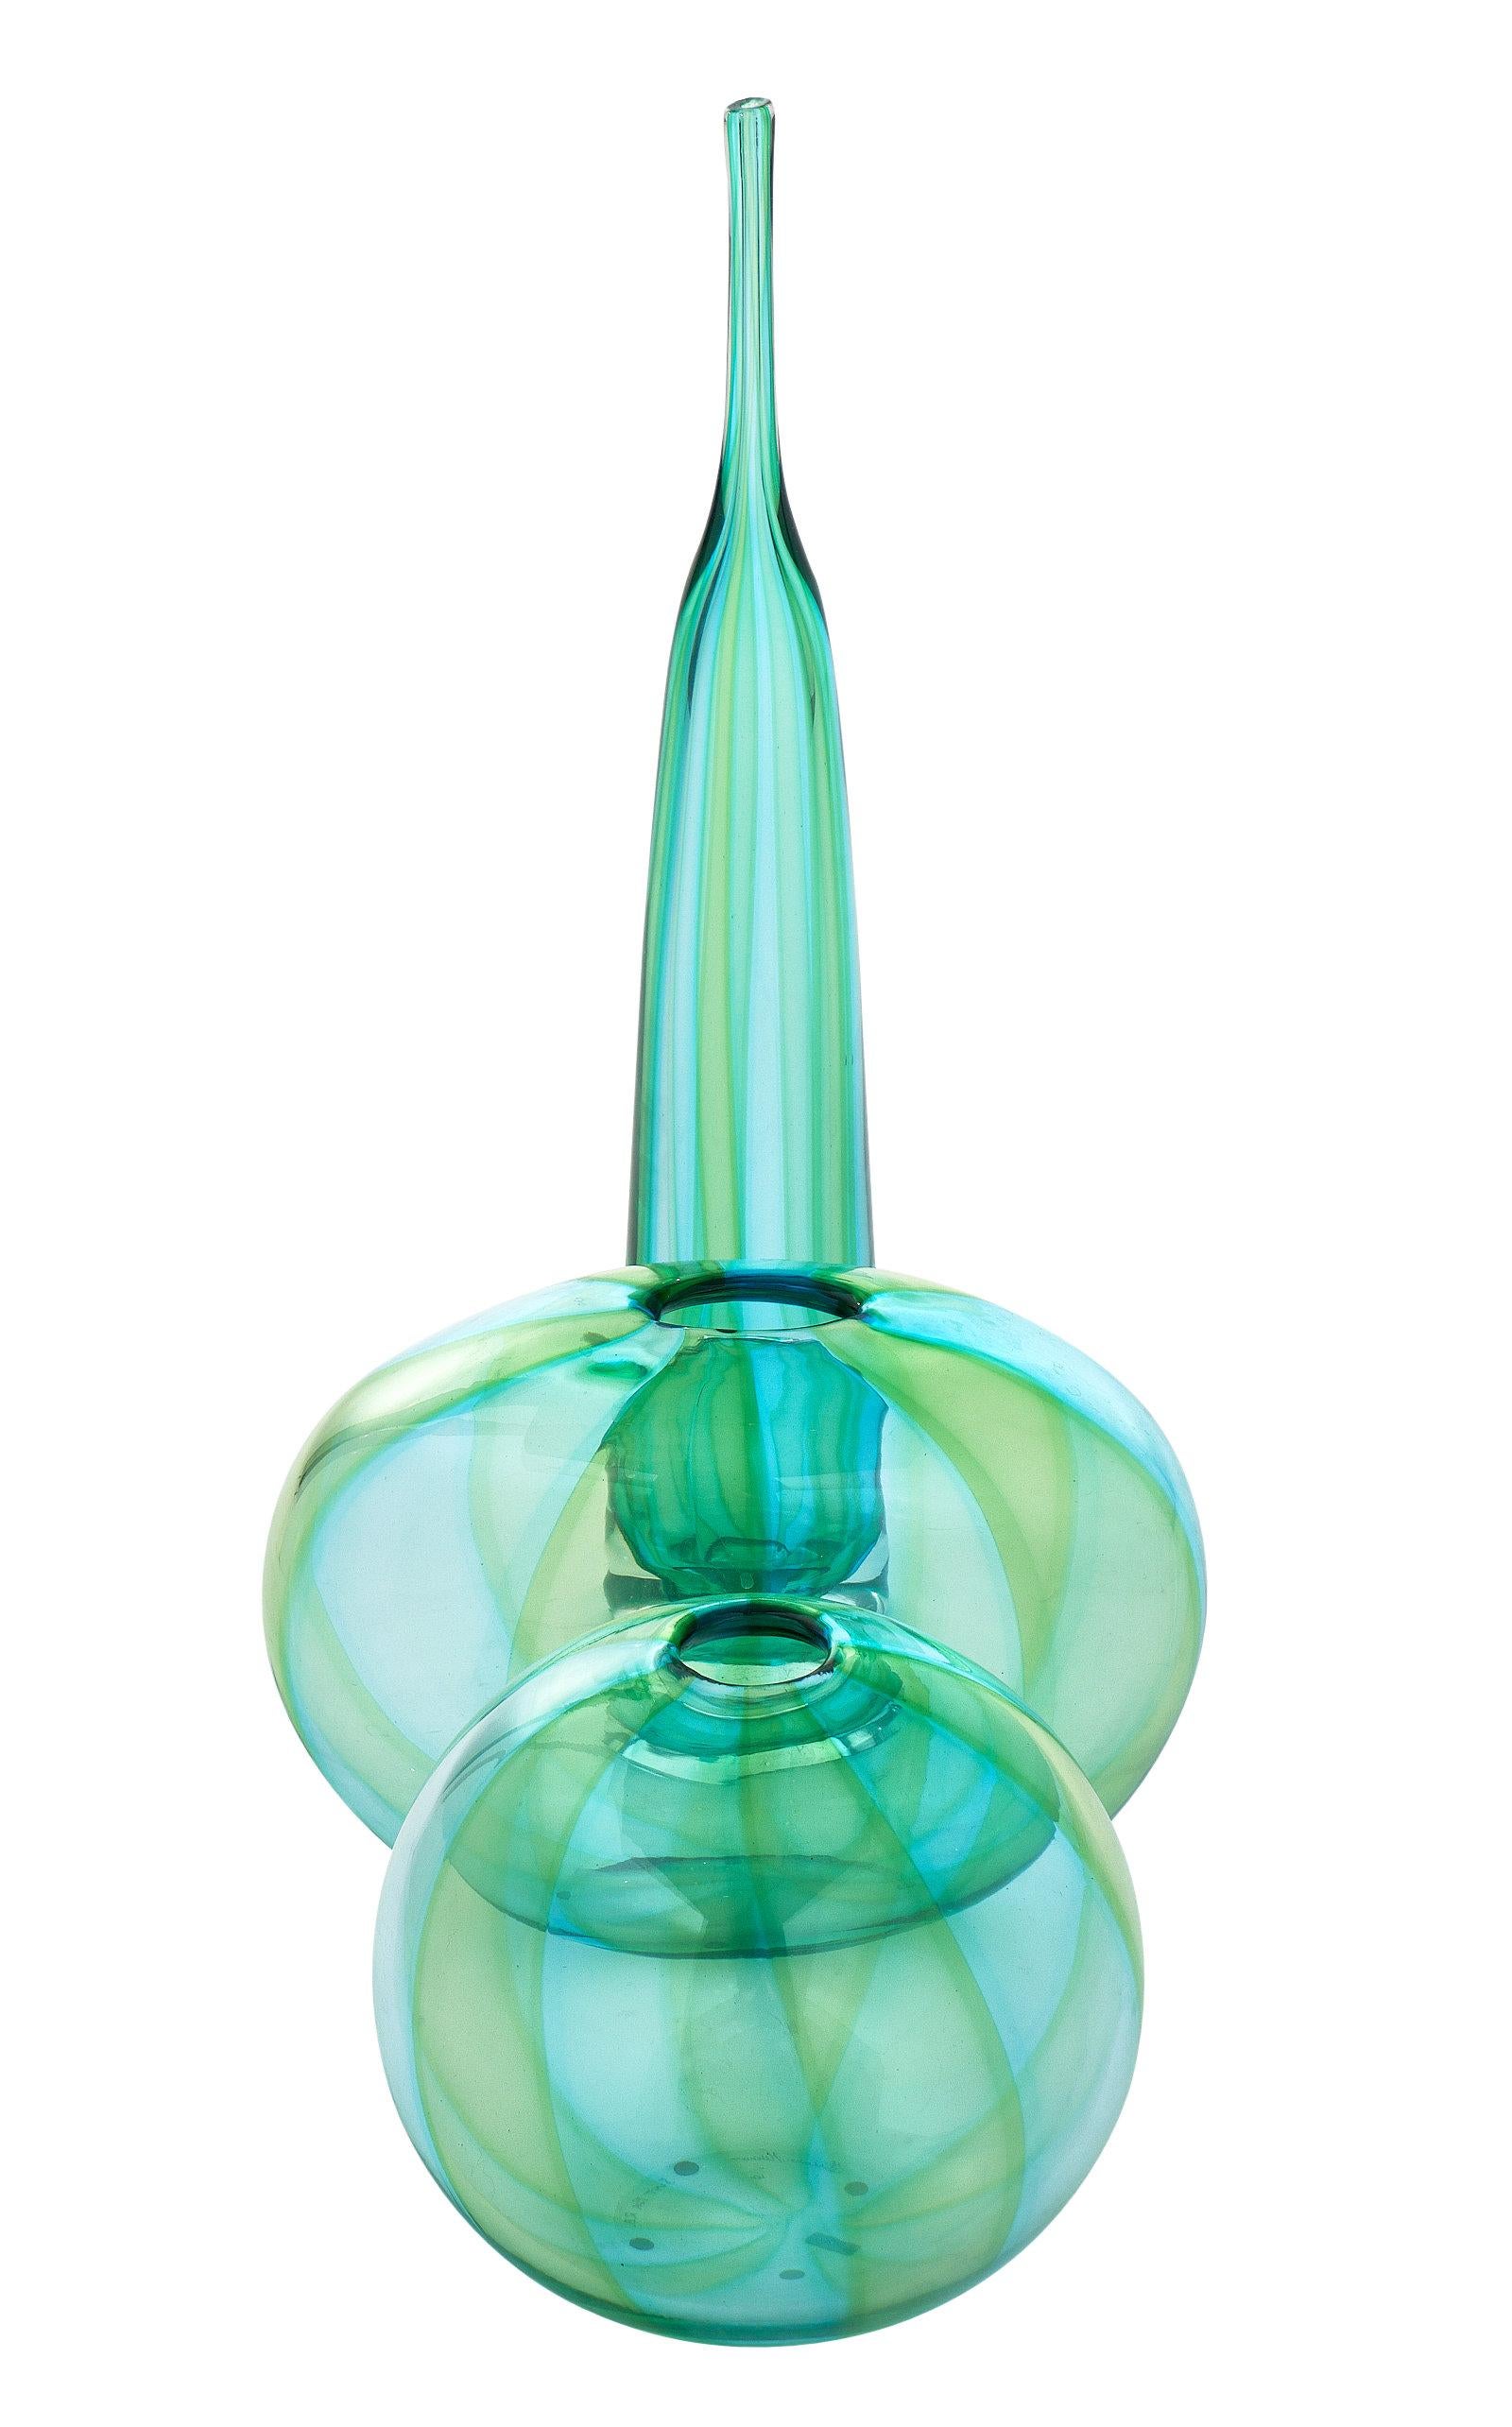 Handblown Murano glass trio. This dynamic Murano vessel trio combines swirling shades of aqua and green glass. We love the shapes and beautiful, unique details.

The measurements listed are for the tall vase. The medium vase is 9.875” in height,